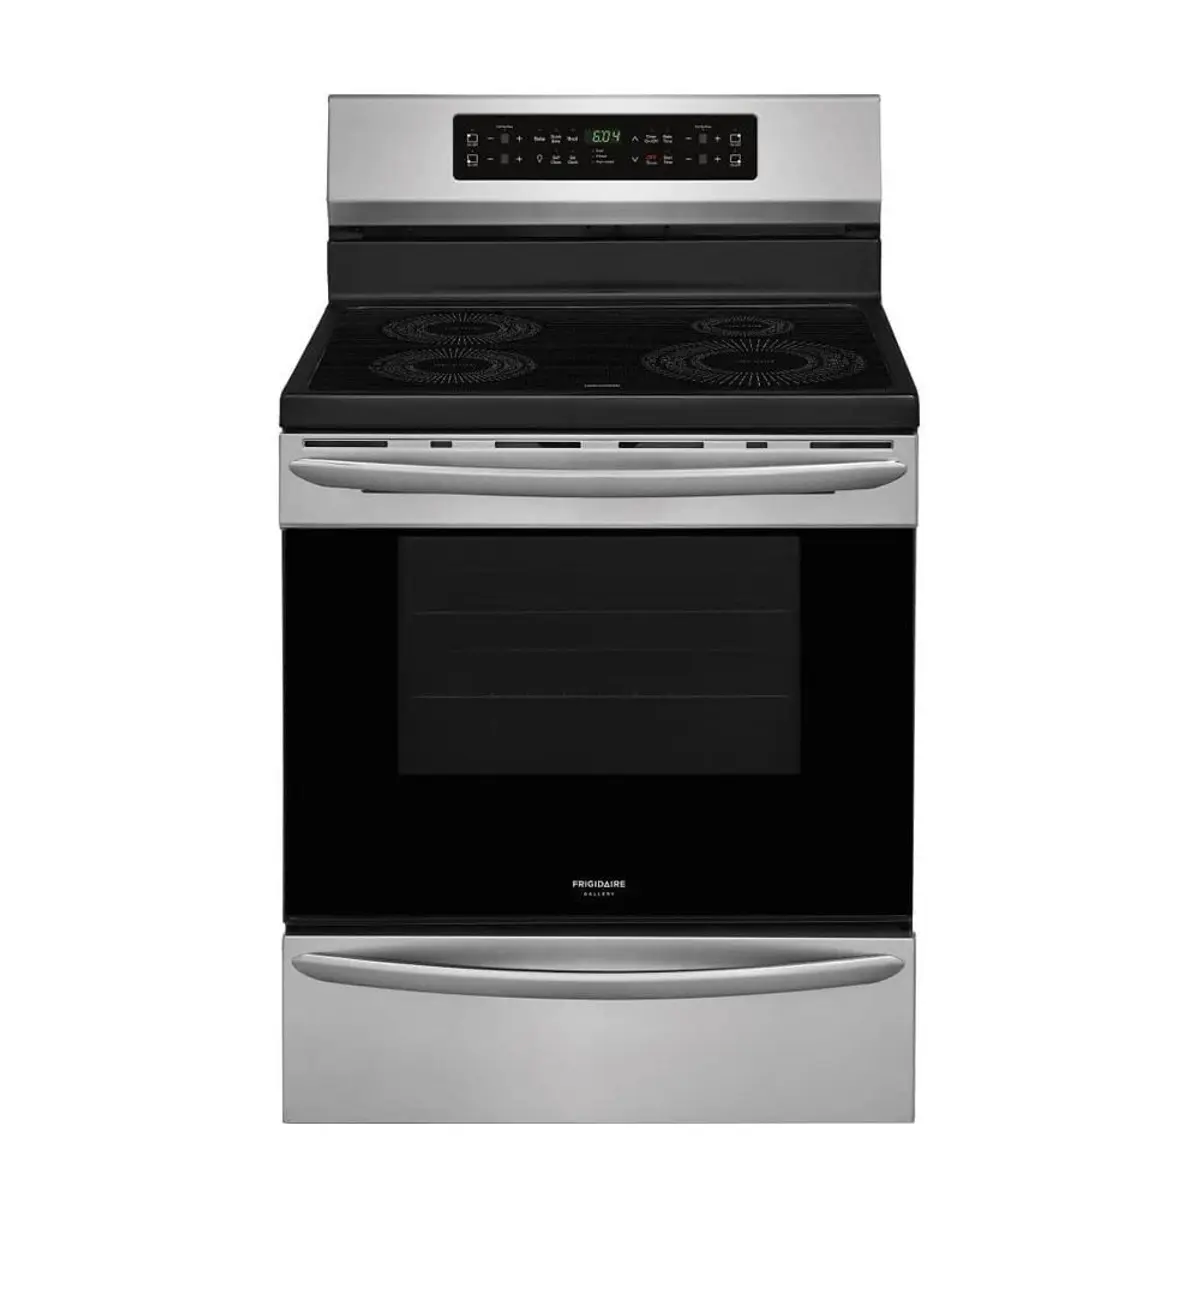 Frigidaire 30 Inch Induction Cooktop review